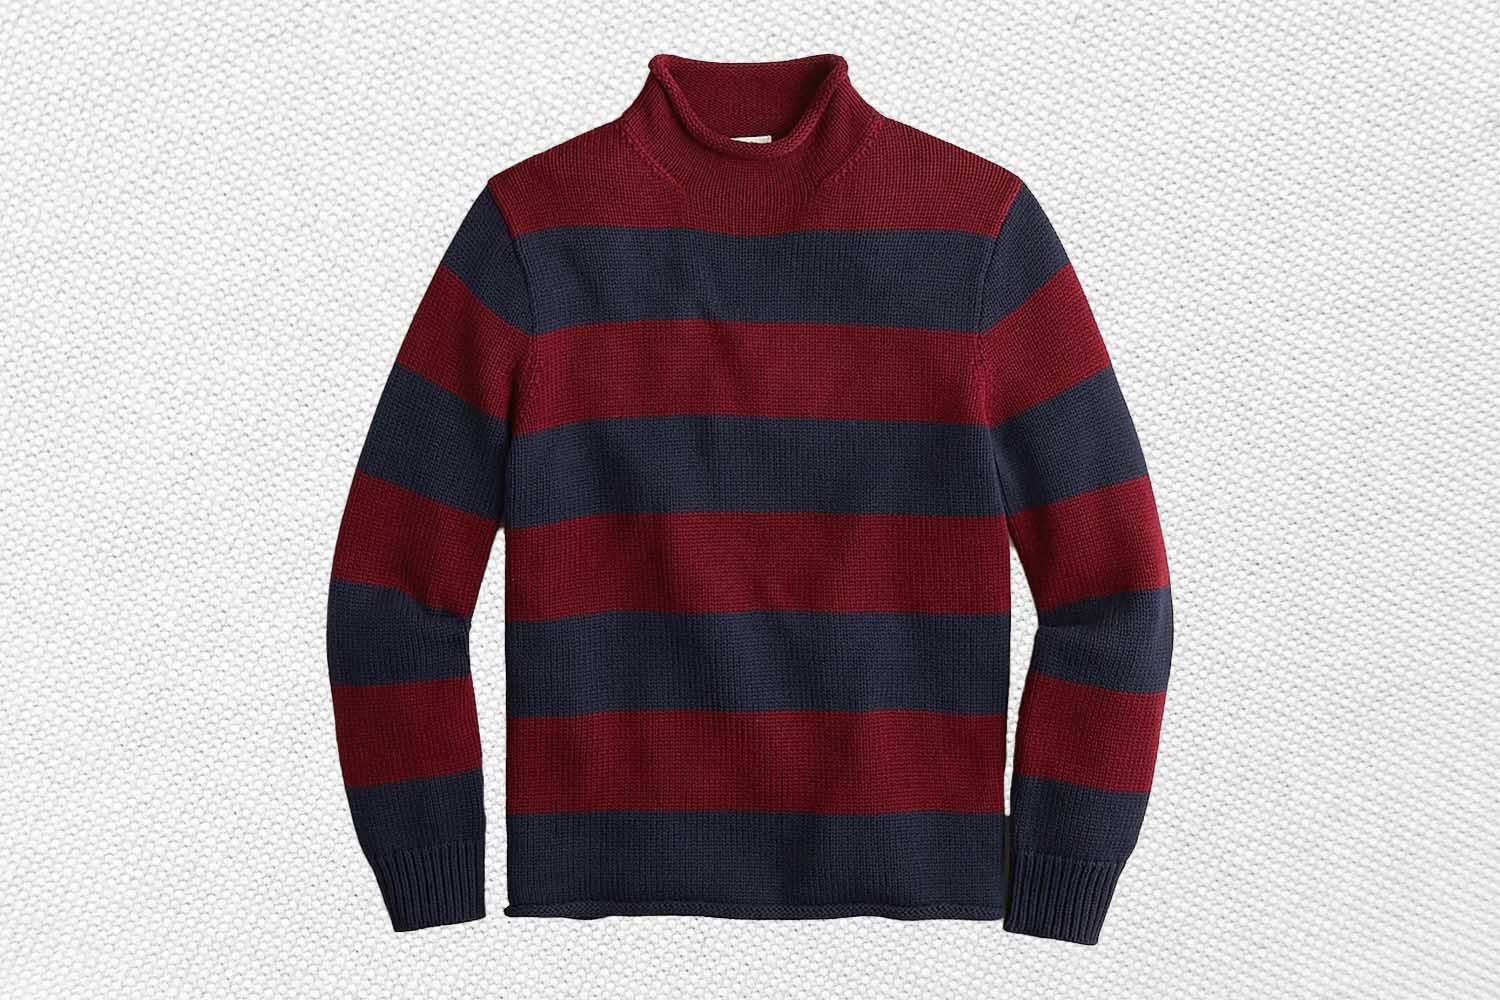 a blue and maroon striped rollneck sweater from J.Crew on a grey background